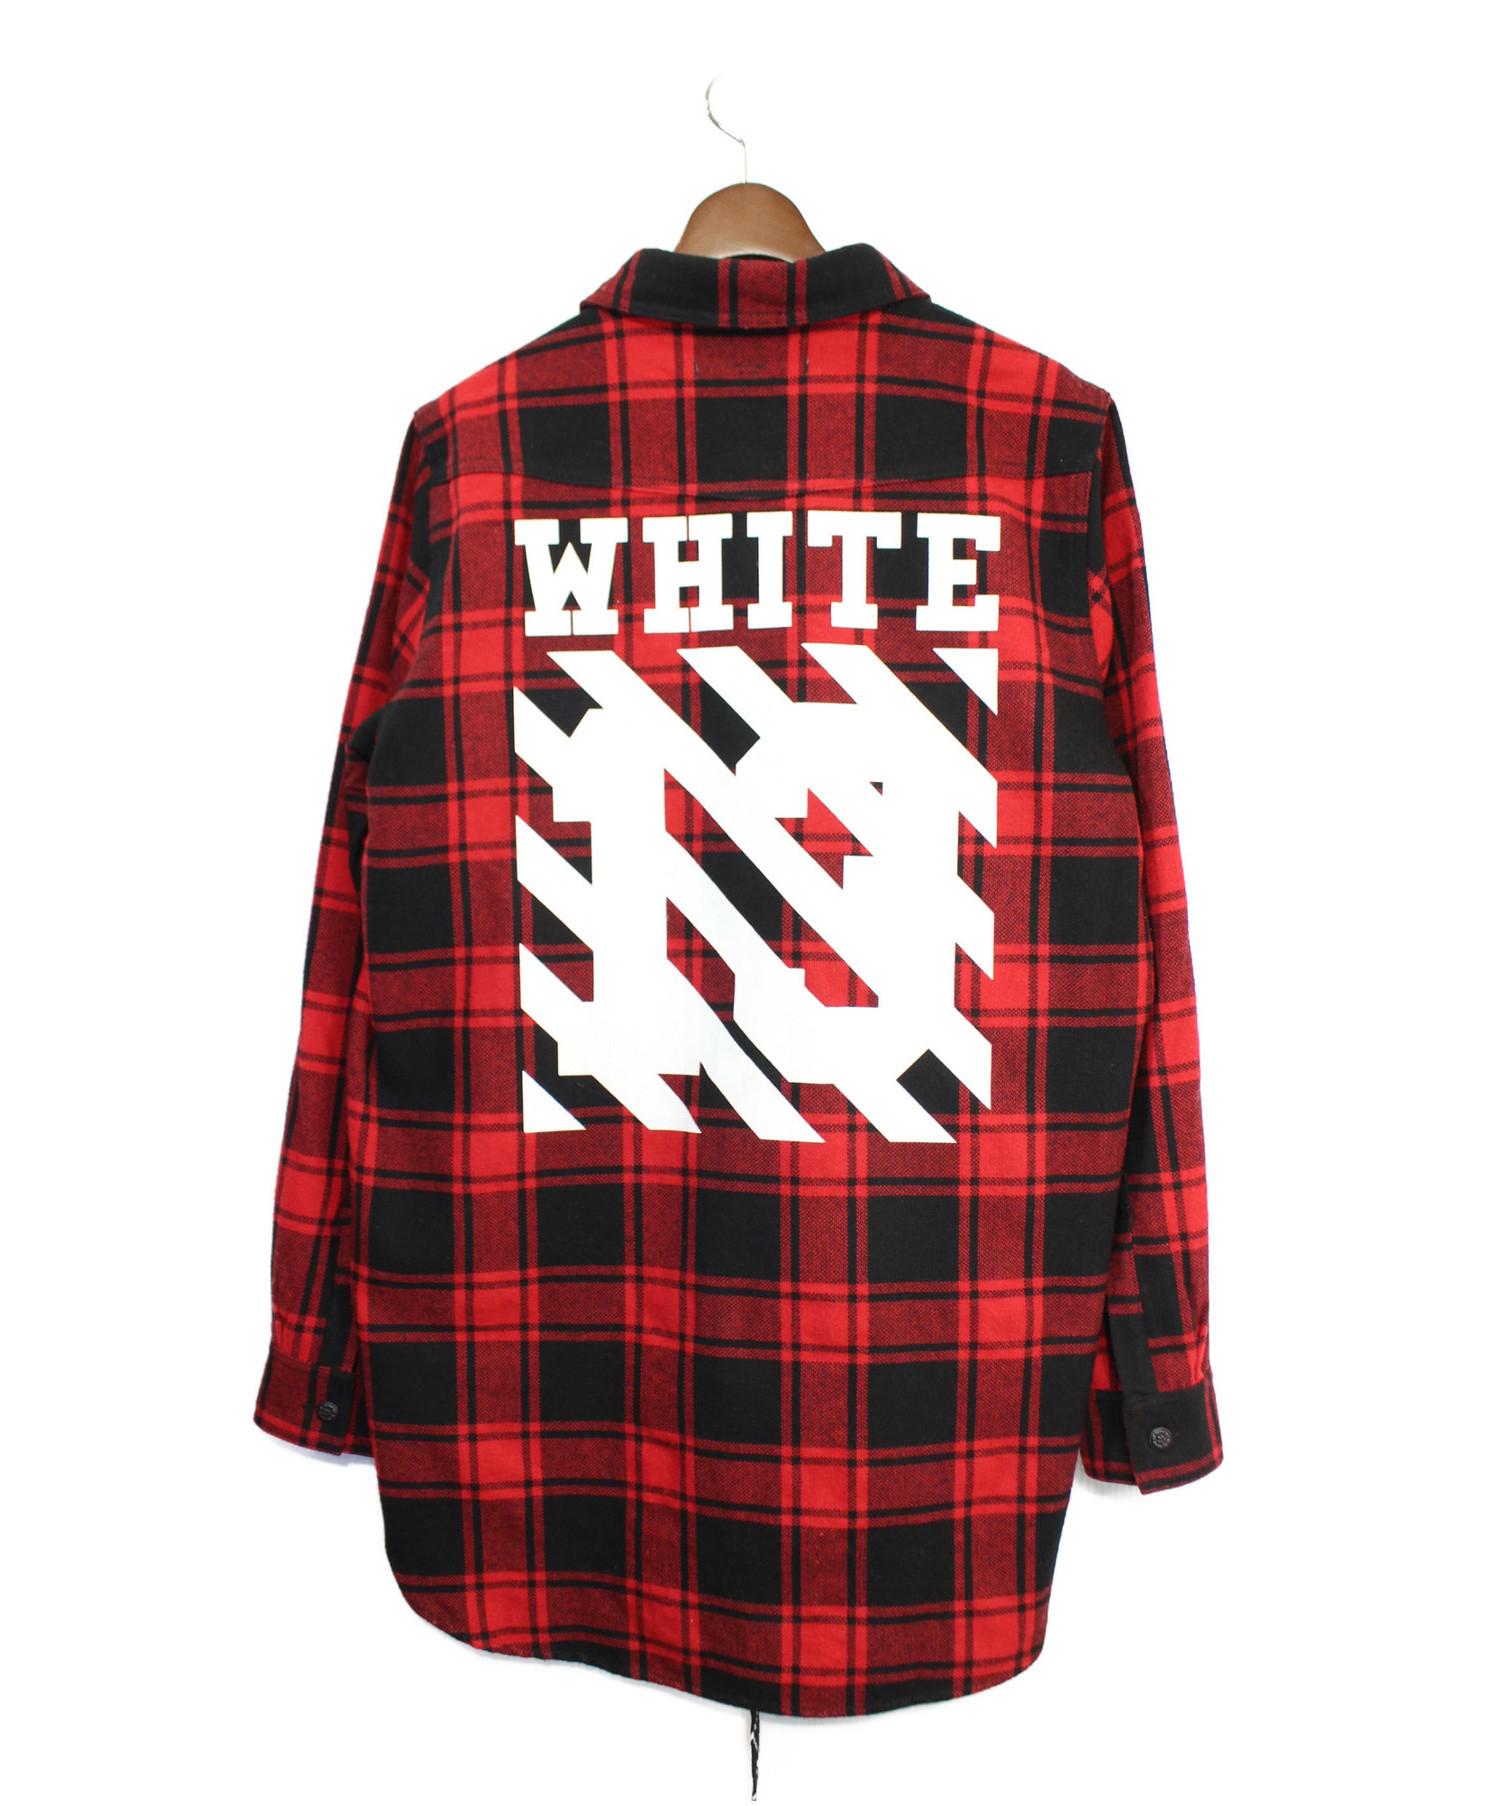 off-white シャツ検討致します